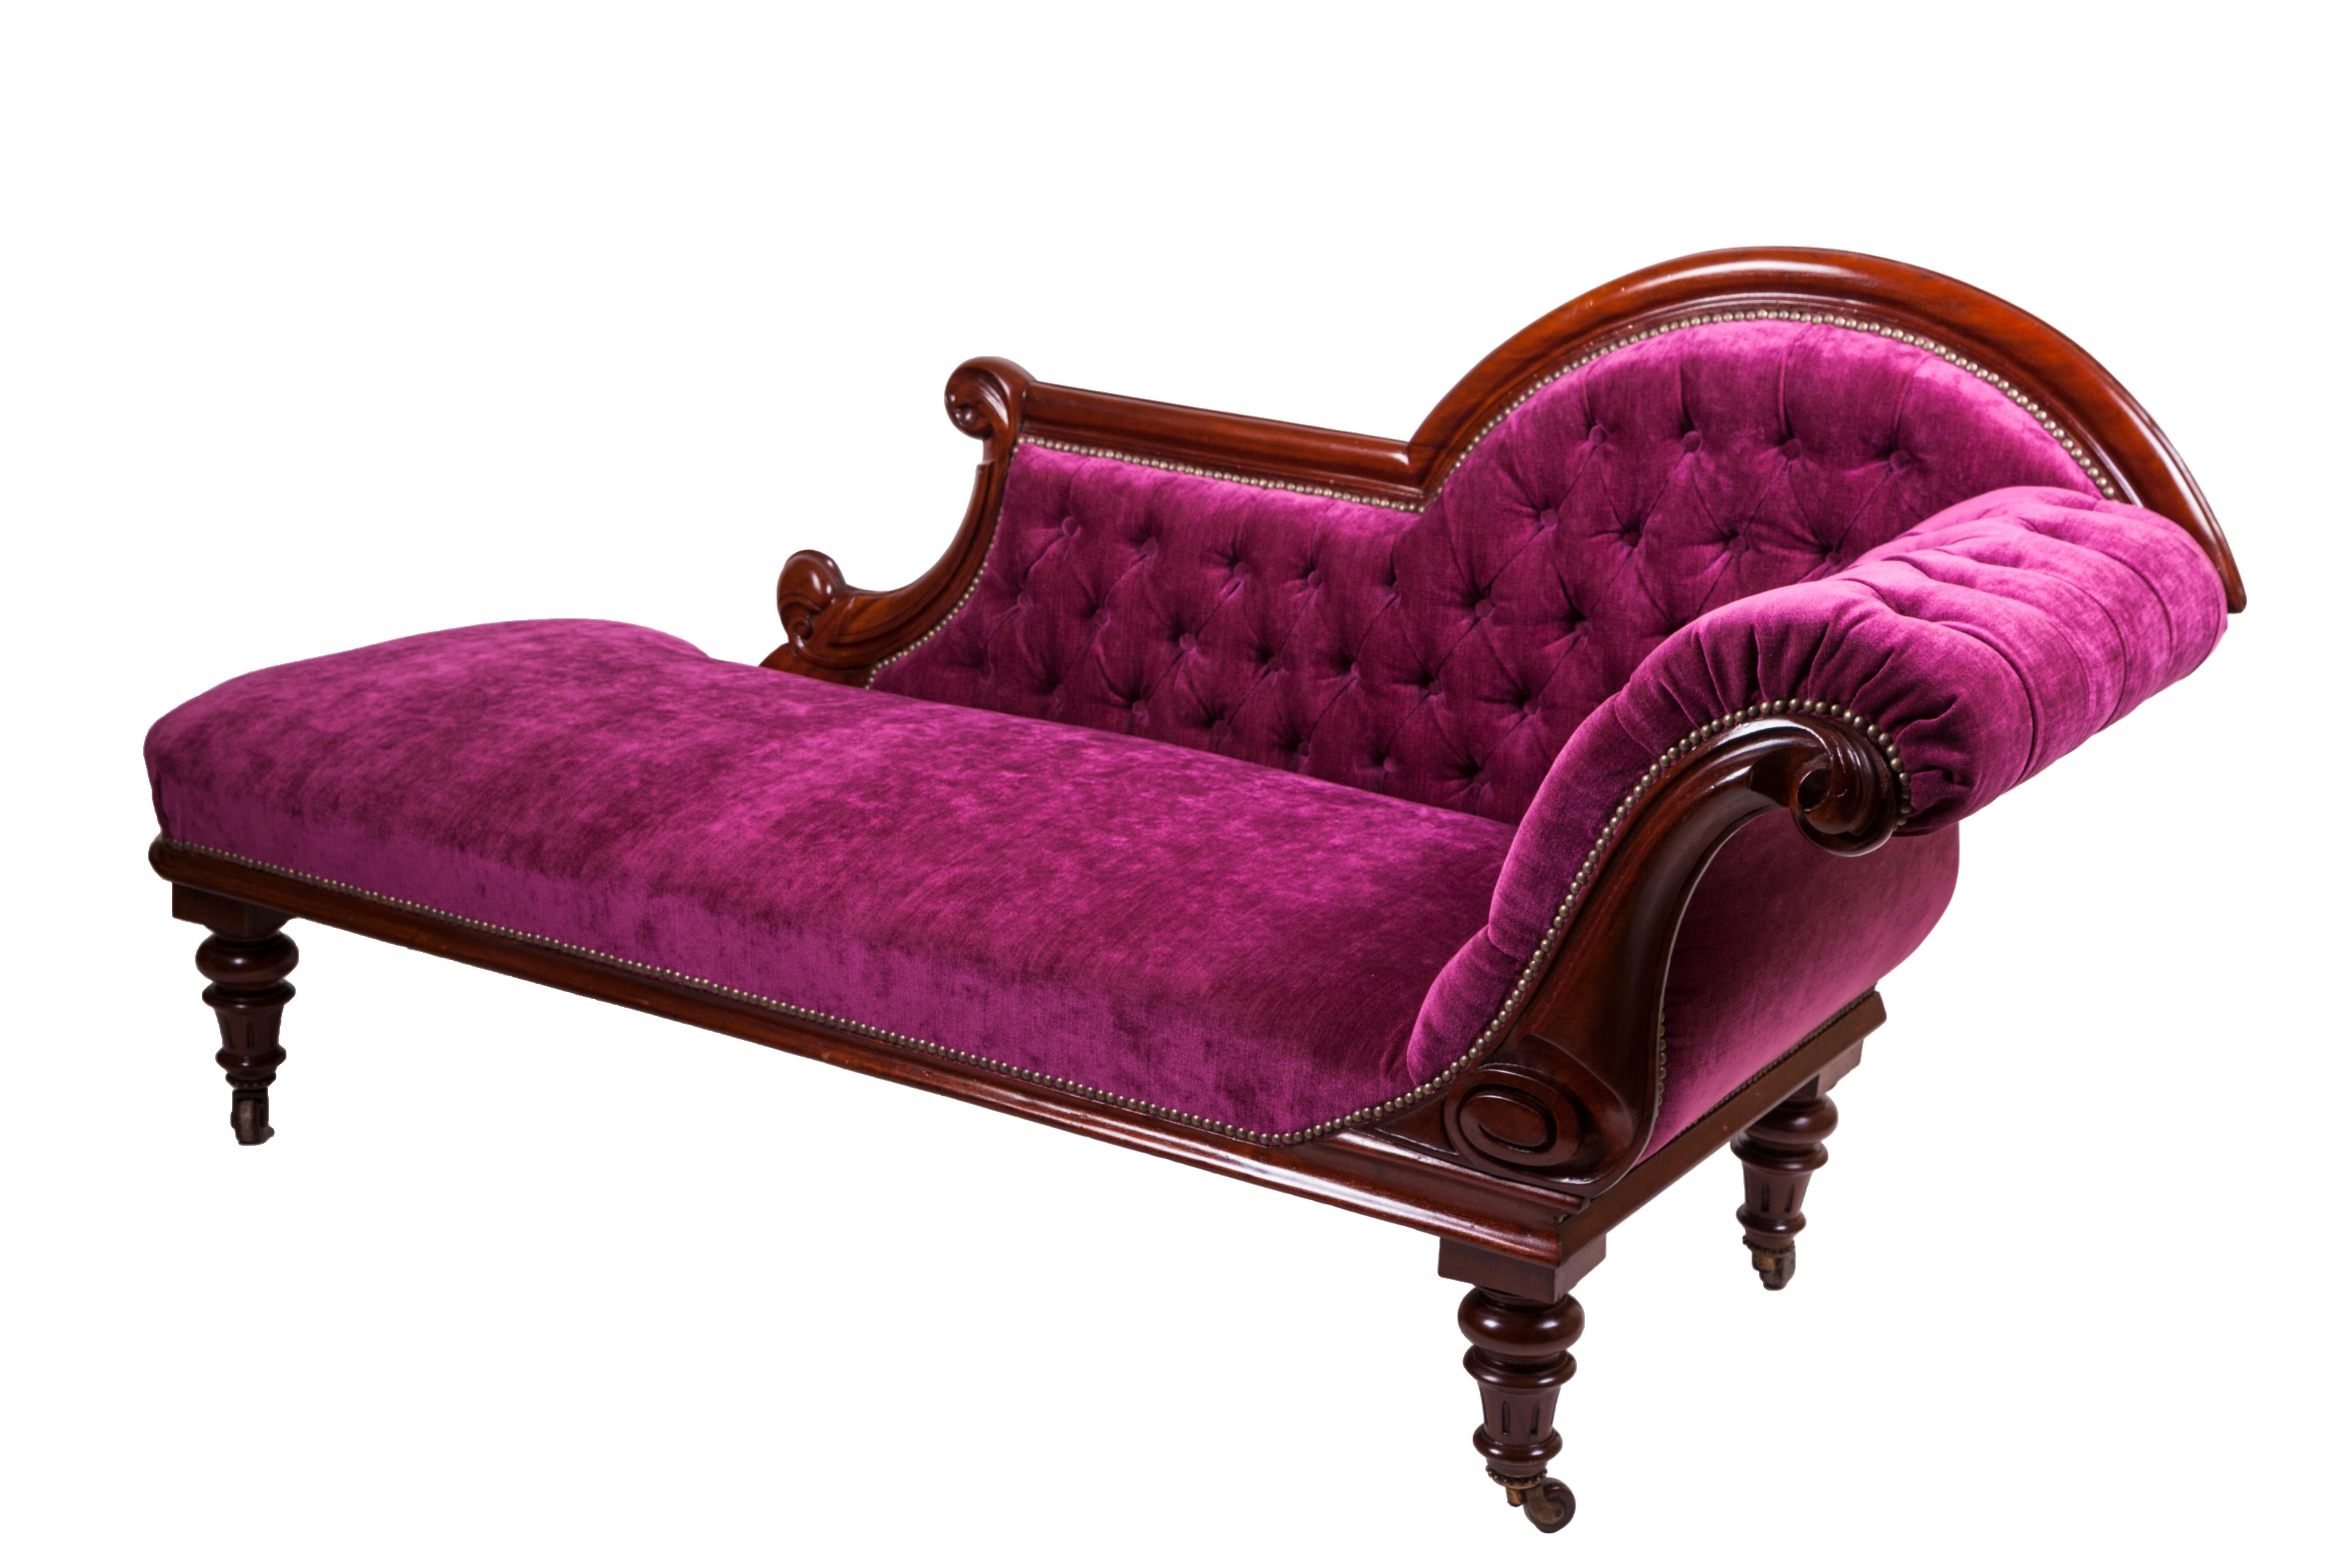 Carved 19th Century Victorian Mahogany Chaise Lounge